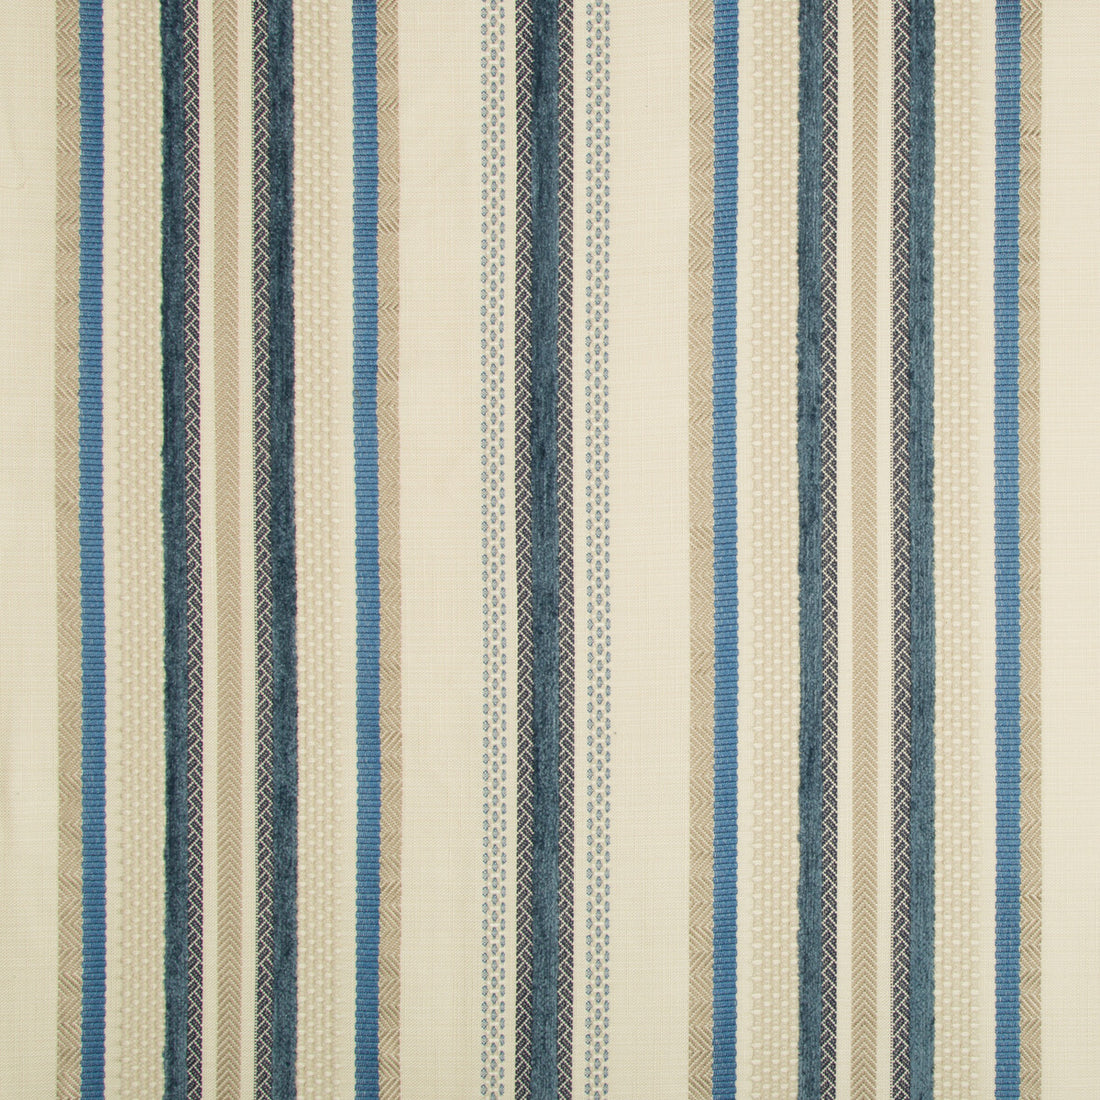 Kravet Design fabric in 35136-515 color - pattern 35136.515.0 - by Kravet Design in the Performance Crypton Home collection